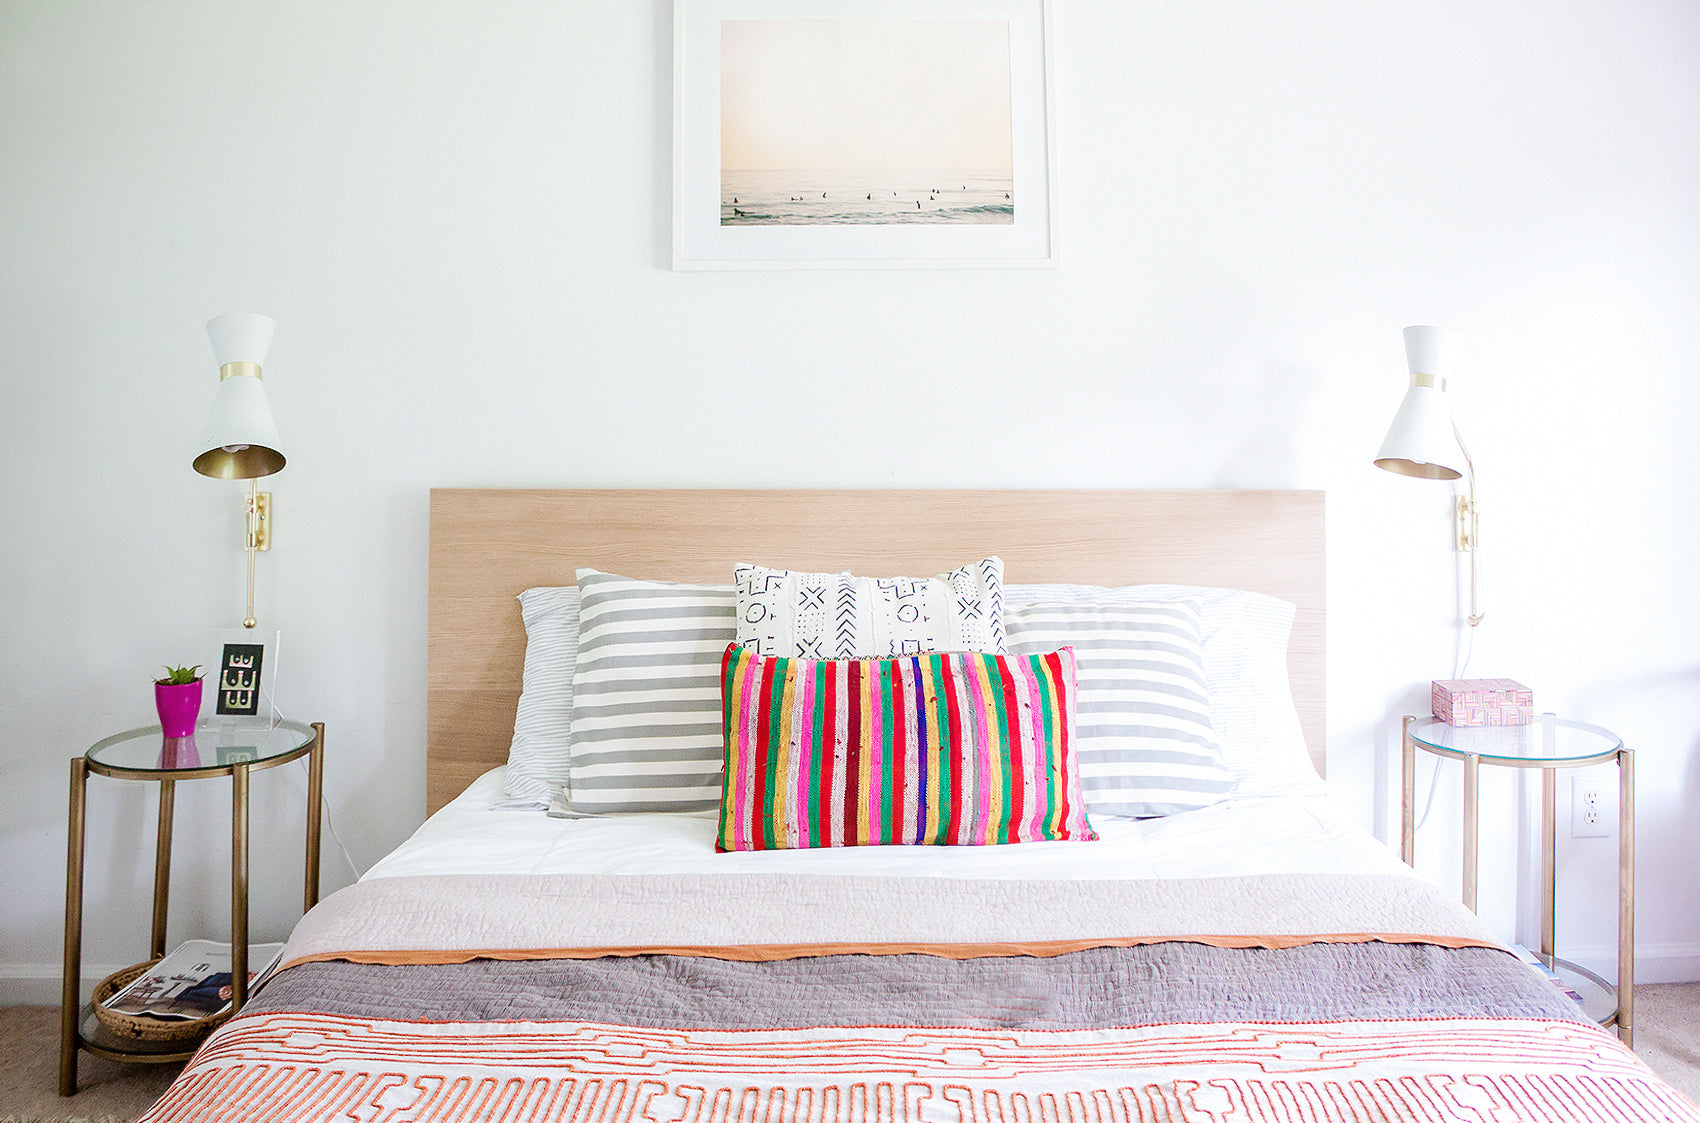 Simple master bed with colorful duvet and patterned cushions